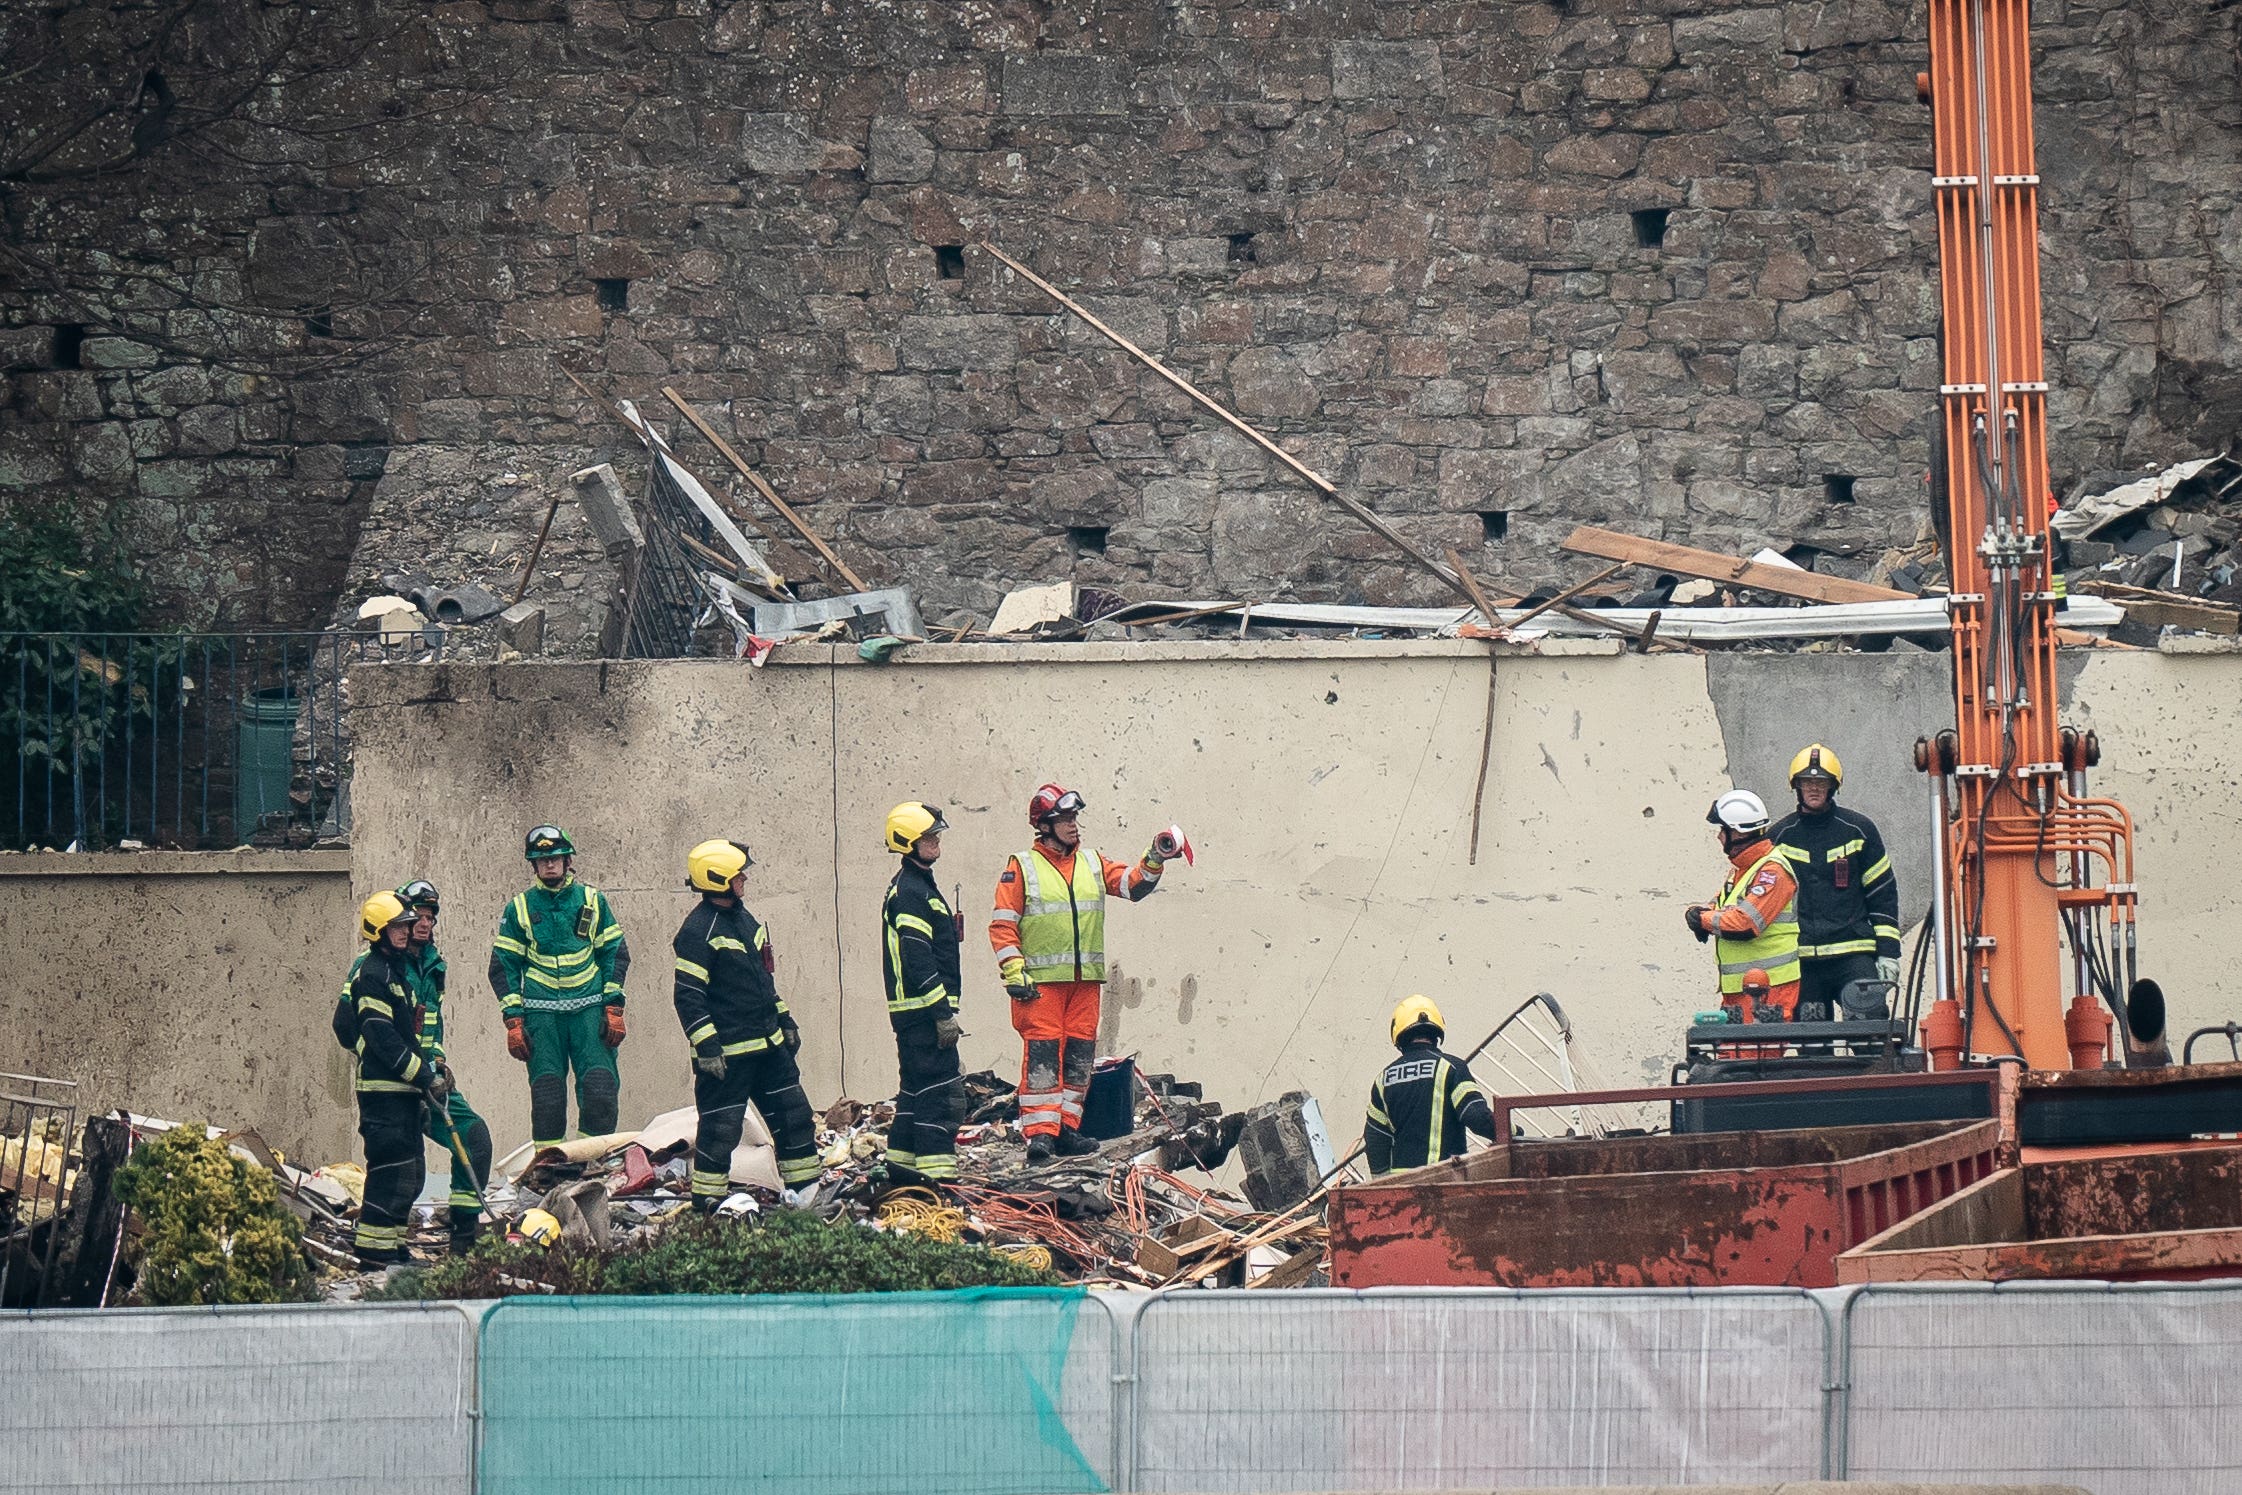 Specialist rescue teams at the scene of an explosion and fire at a block of flats in St Helier, Jersey (Aaron Chown/PA)